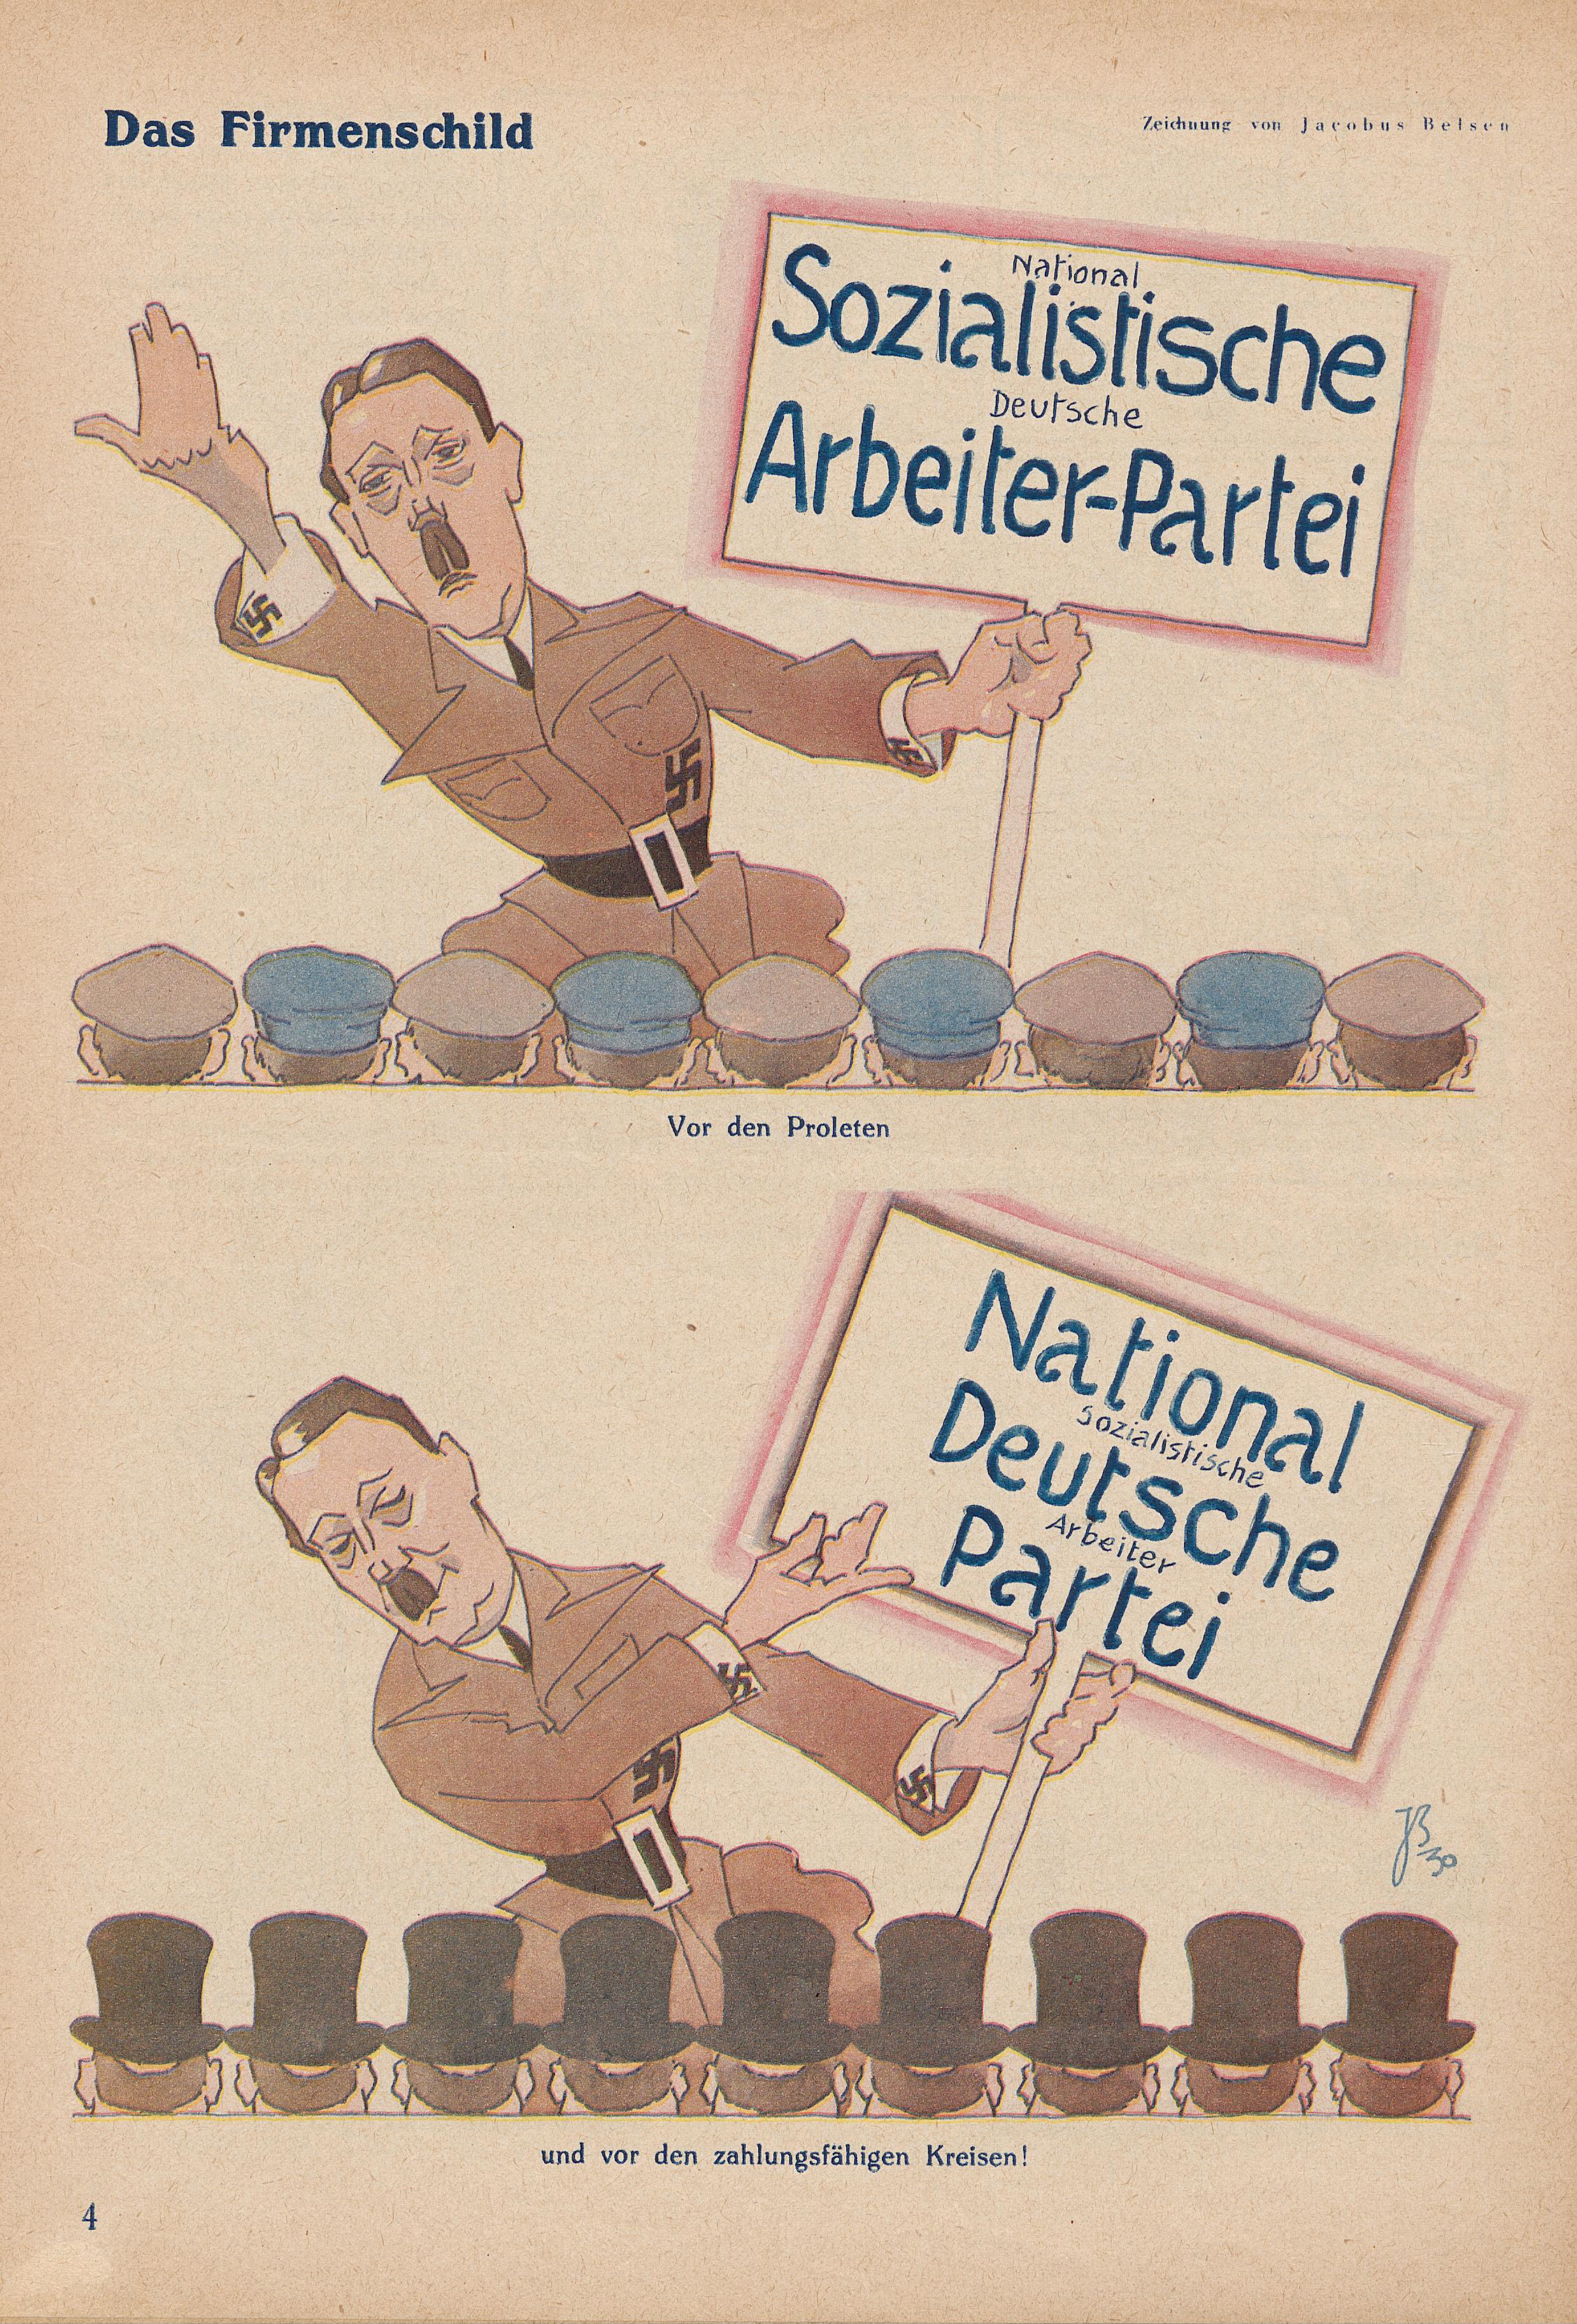 Nazi emphasis on workers and nationalists.jpg